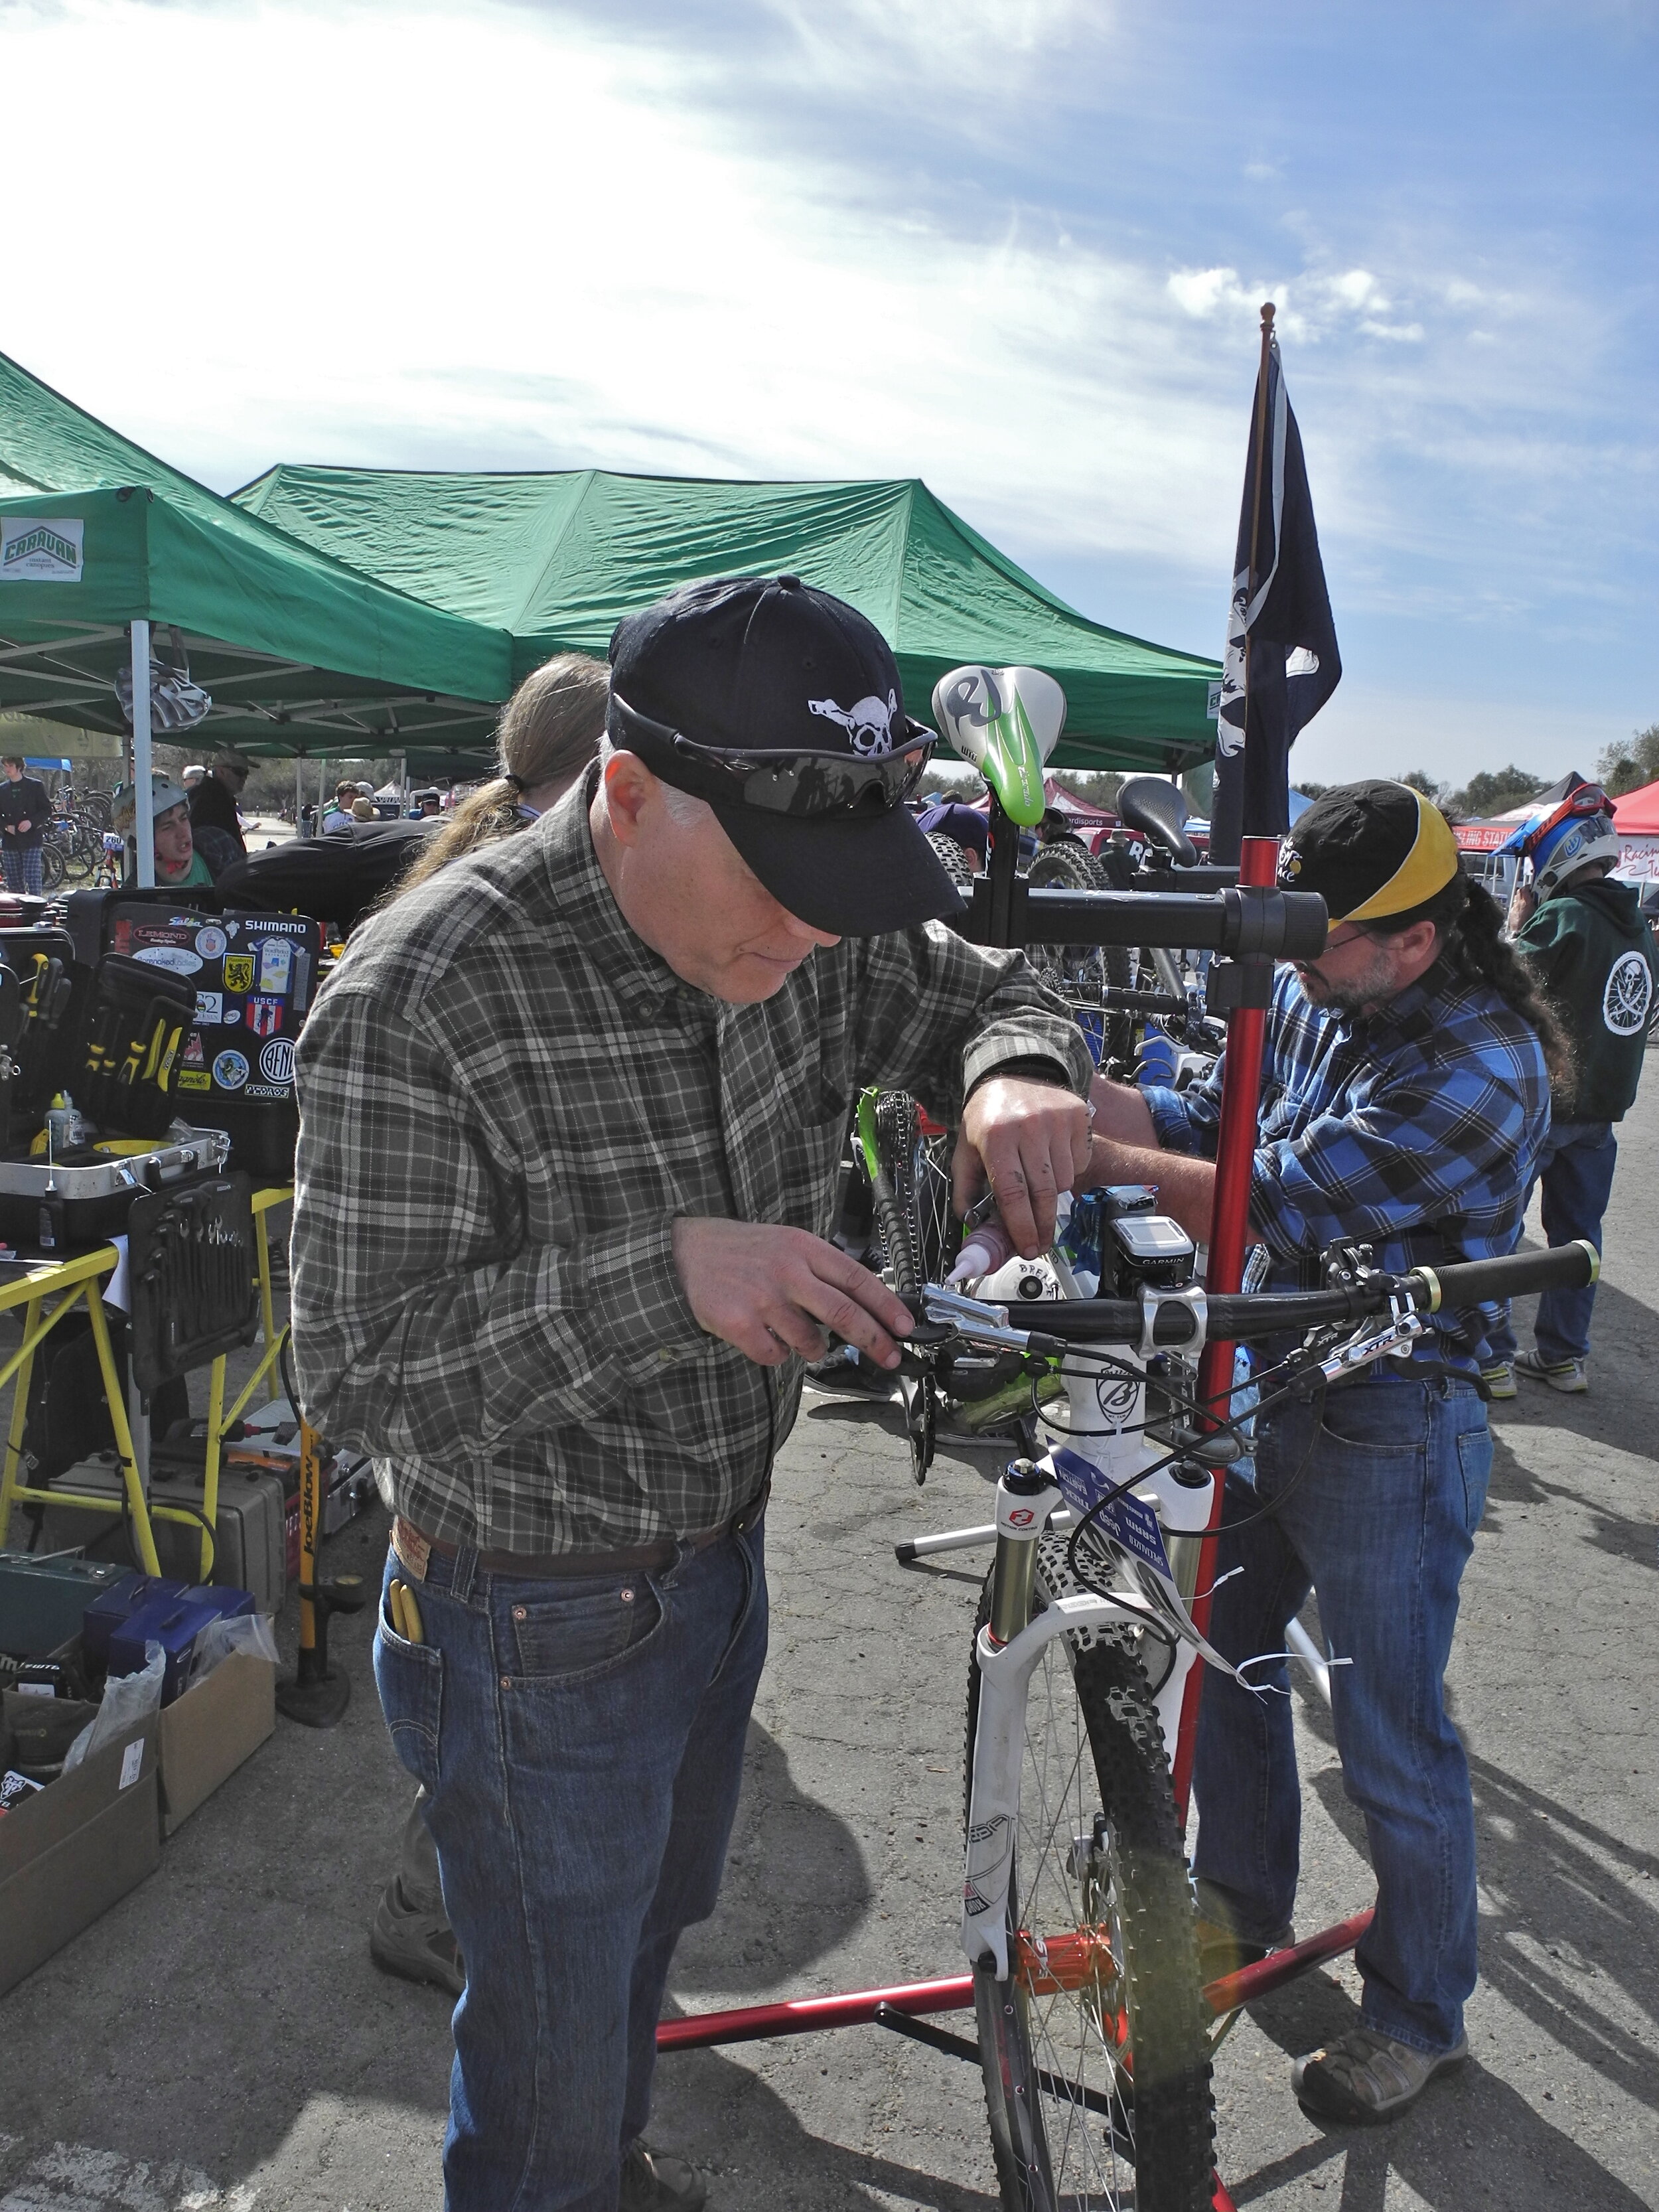   Pop up bicycle repair shops  appear as needed, like at this one for the Drake H.S.team at a NorCal high school bicycle race in Granite Bay. 